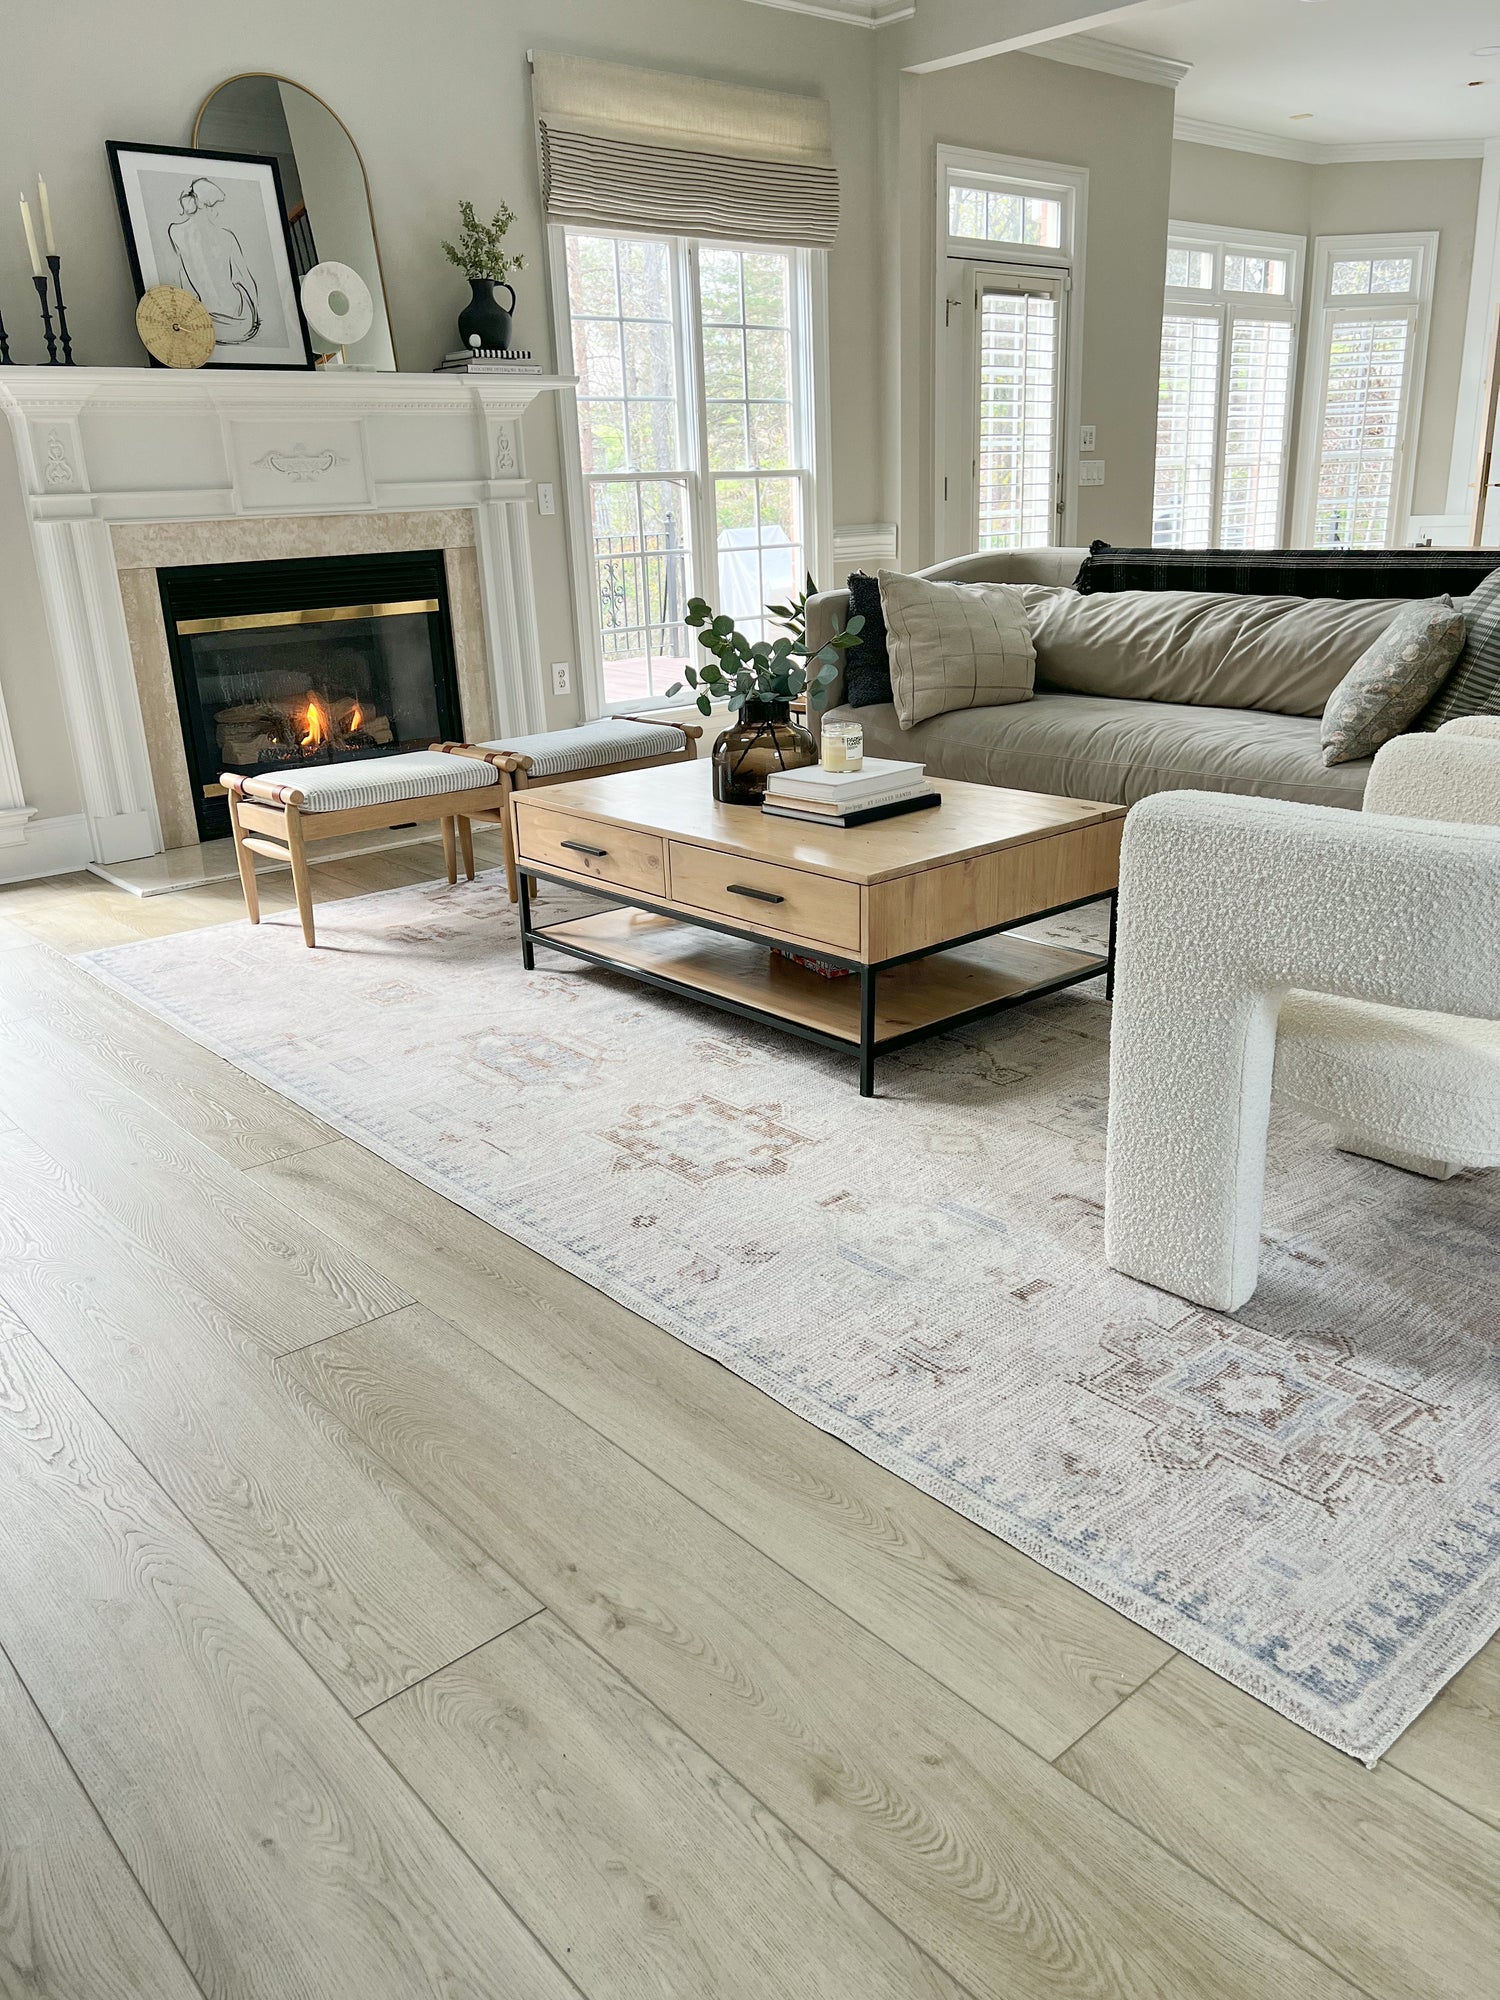 Photo of Hewn Stoneform Luxury Plank Flooring in a beautiful living room with a fireplace